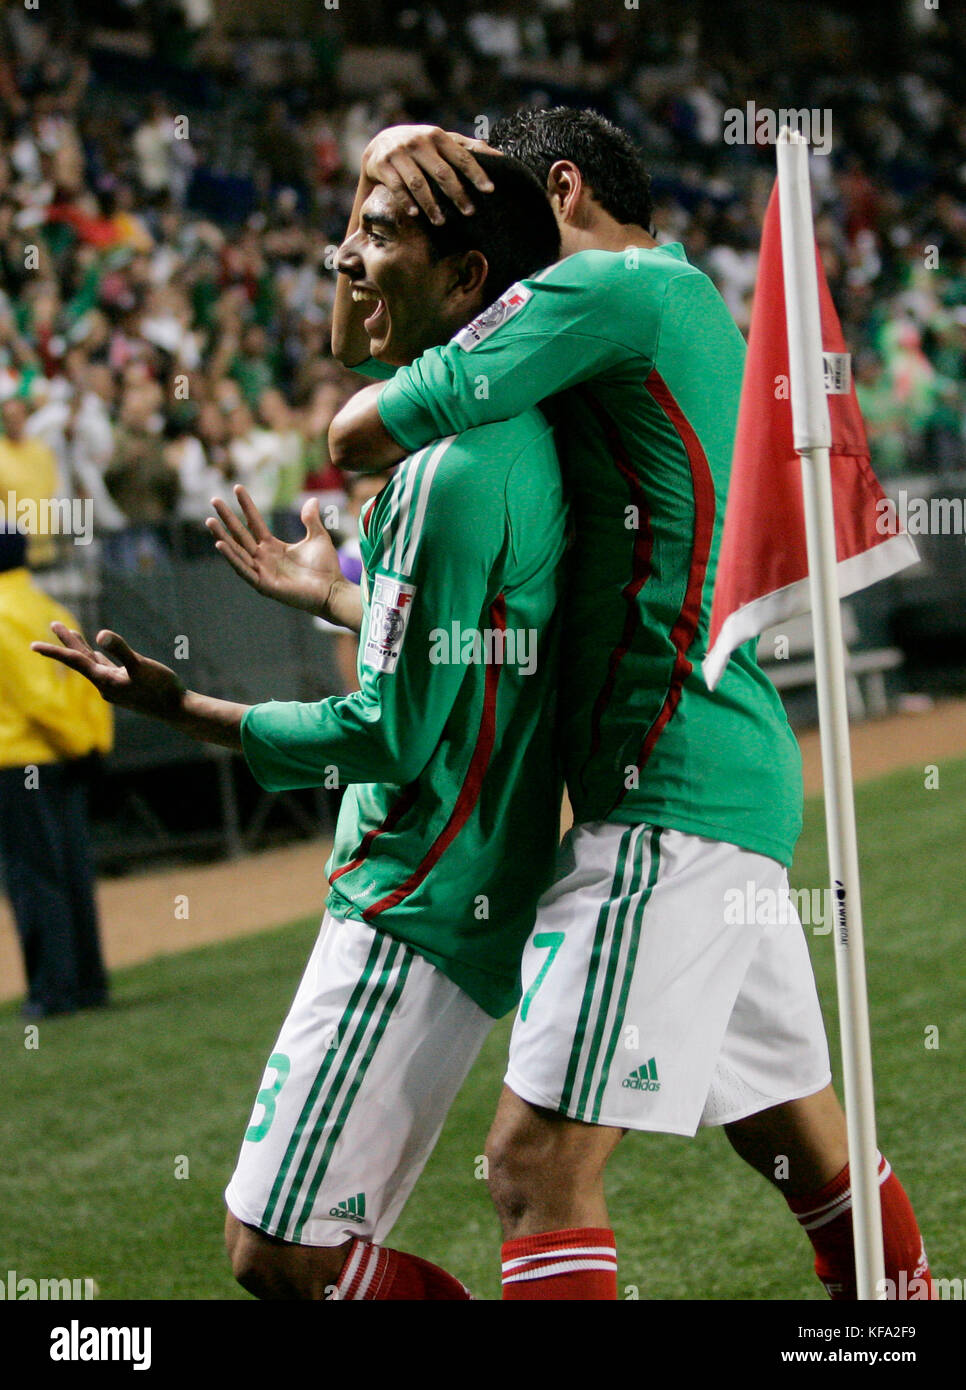 Mexico's Edgar Castillo, left, is hugged by teammate Pablo Barrera after scoring a goal against Guatemal in the first half at a CONCACAF Men's Olympic Qualifying soccer tournament game in Carson, Calif., on Friday, March 14, 2008. Photo by Francis Specker Stock Photo